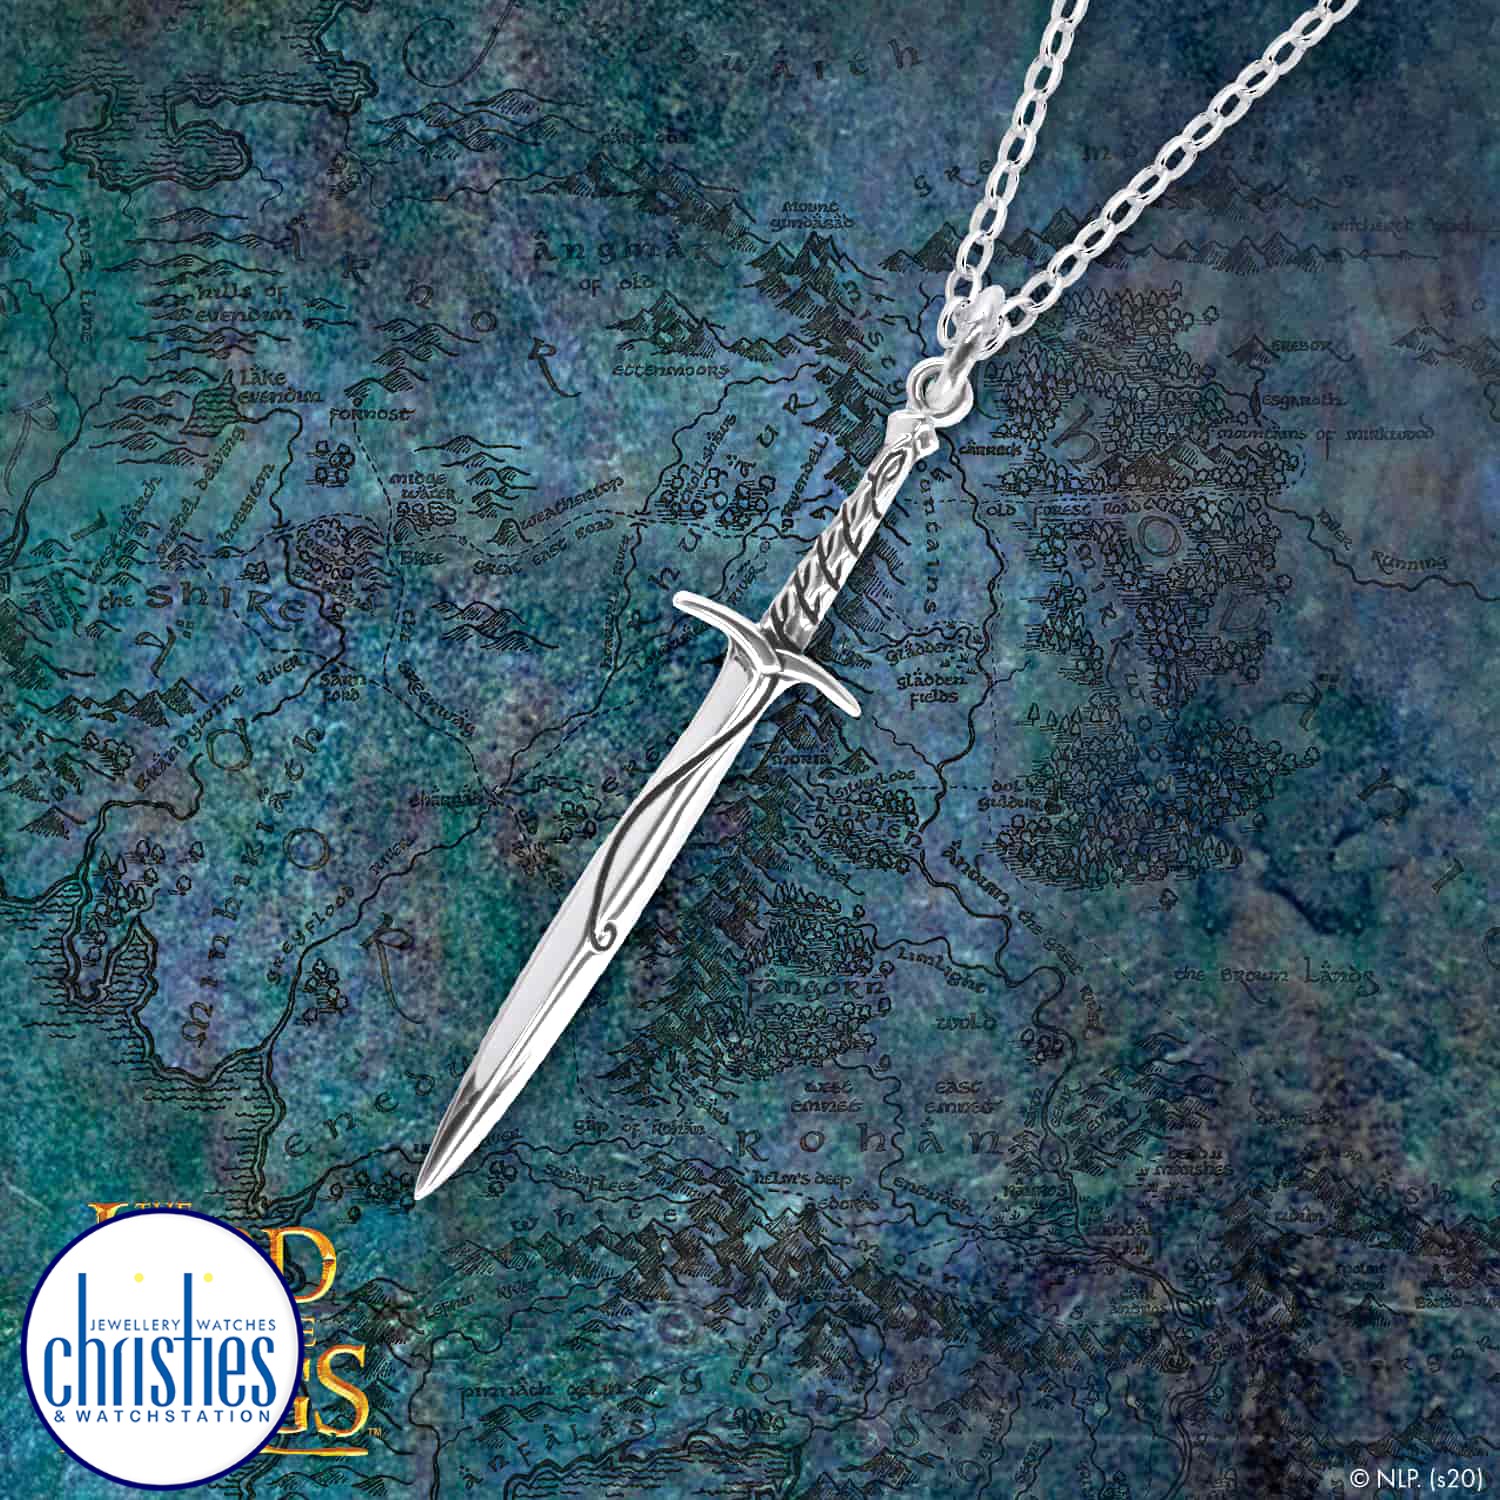 Bilbos Sword Sting Necklace. The Hobbit Bilbos Sword Sting Necklace Crafted in solid 925 Sterling Silver  The Pendant is 65mm (2.6 inches) in length Supplied with a complimentary 45cm (18 inch) Sterling Silver Pendant Chain. Supplied @christies.online